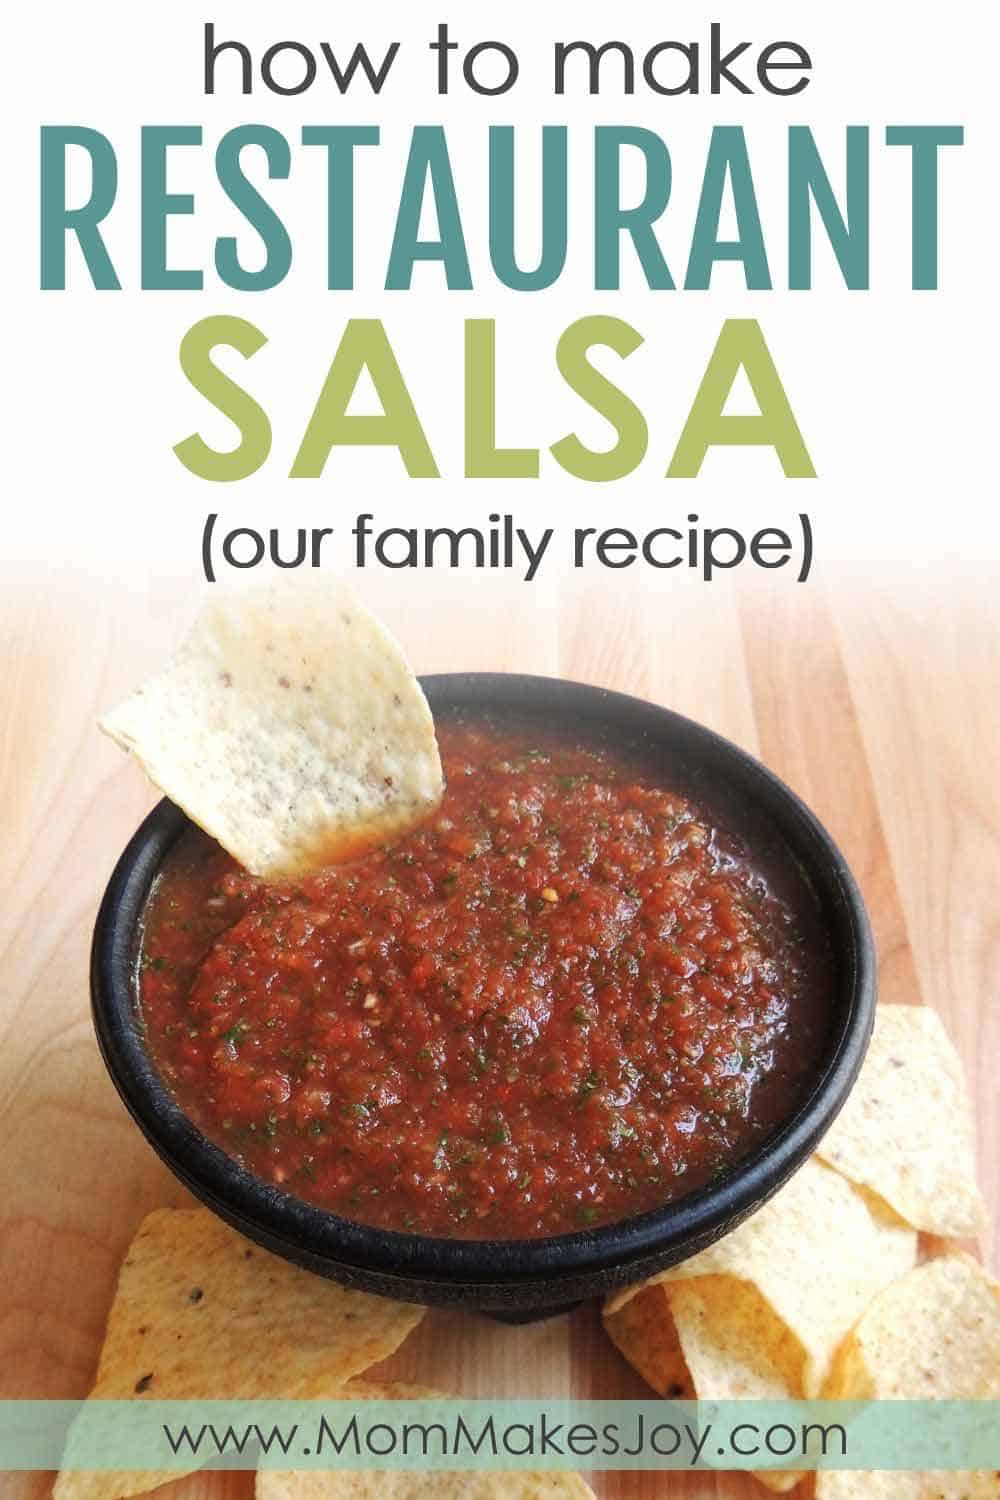 How to Make Restaurant-Style Salsa